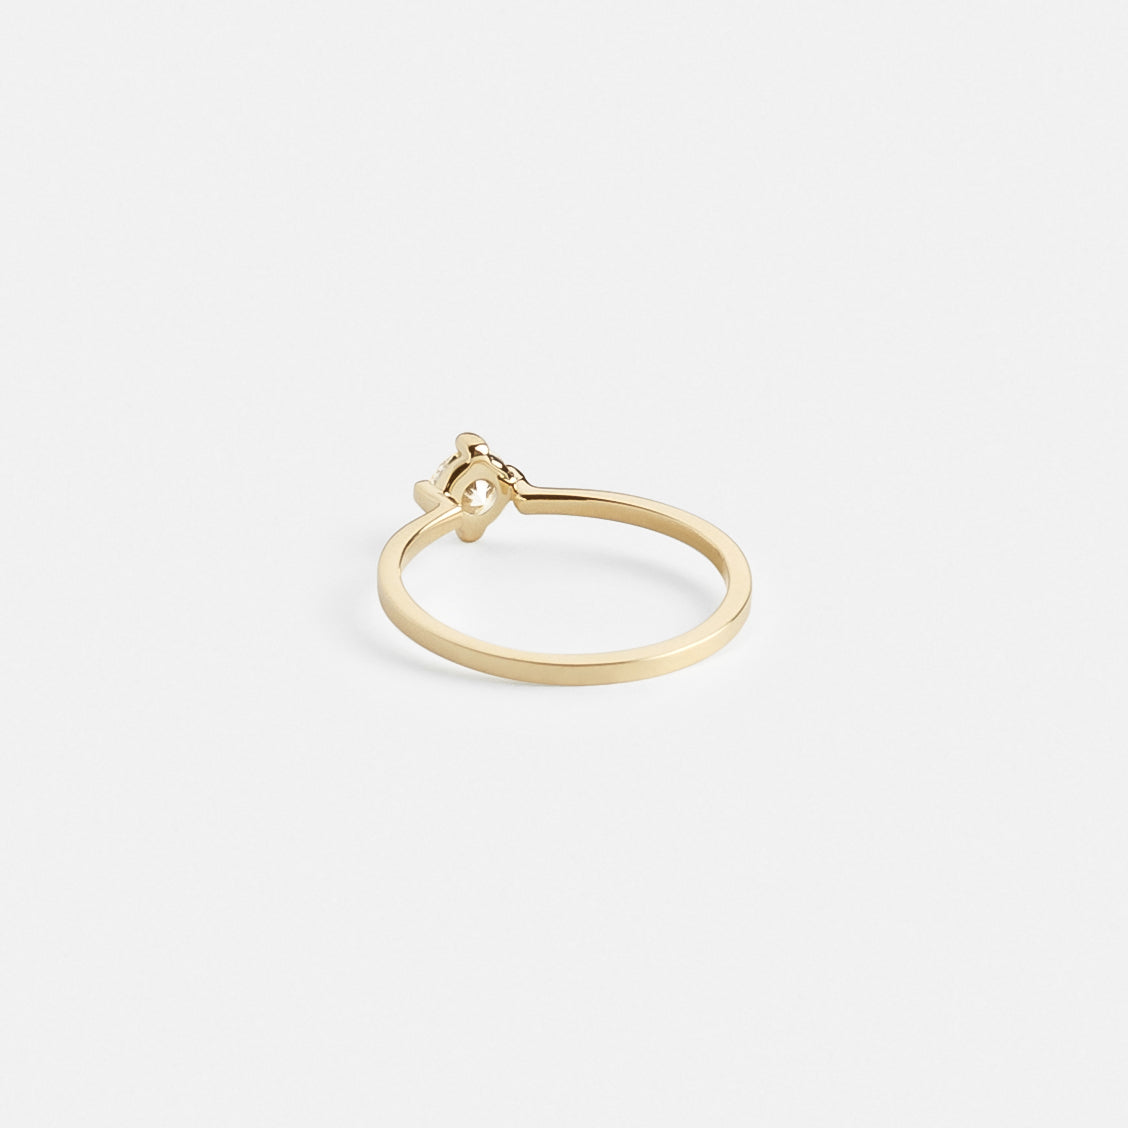 Mini Alternative Ema Ring in 14k Gold set with a round brilliant cut natural 0.4ct diamond By SHW Fine Jewelry NYC